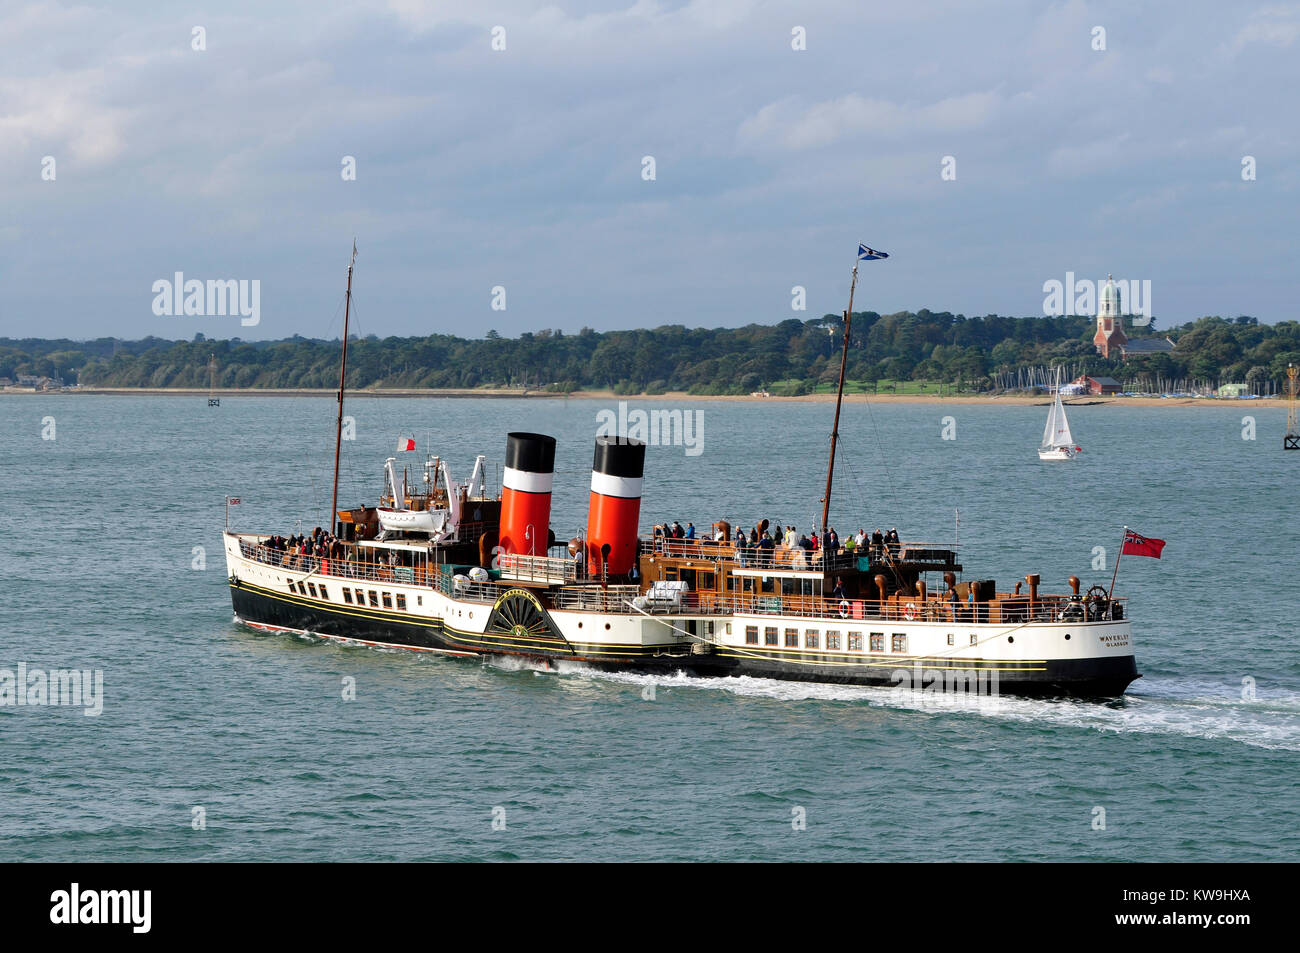 the Waverly paddle steamer taking passengers on a voyage or day trip along Southampton water in Hampshire. The Waverly excursions for ship and steam. Stock Photo